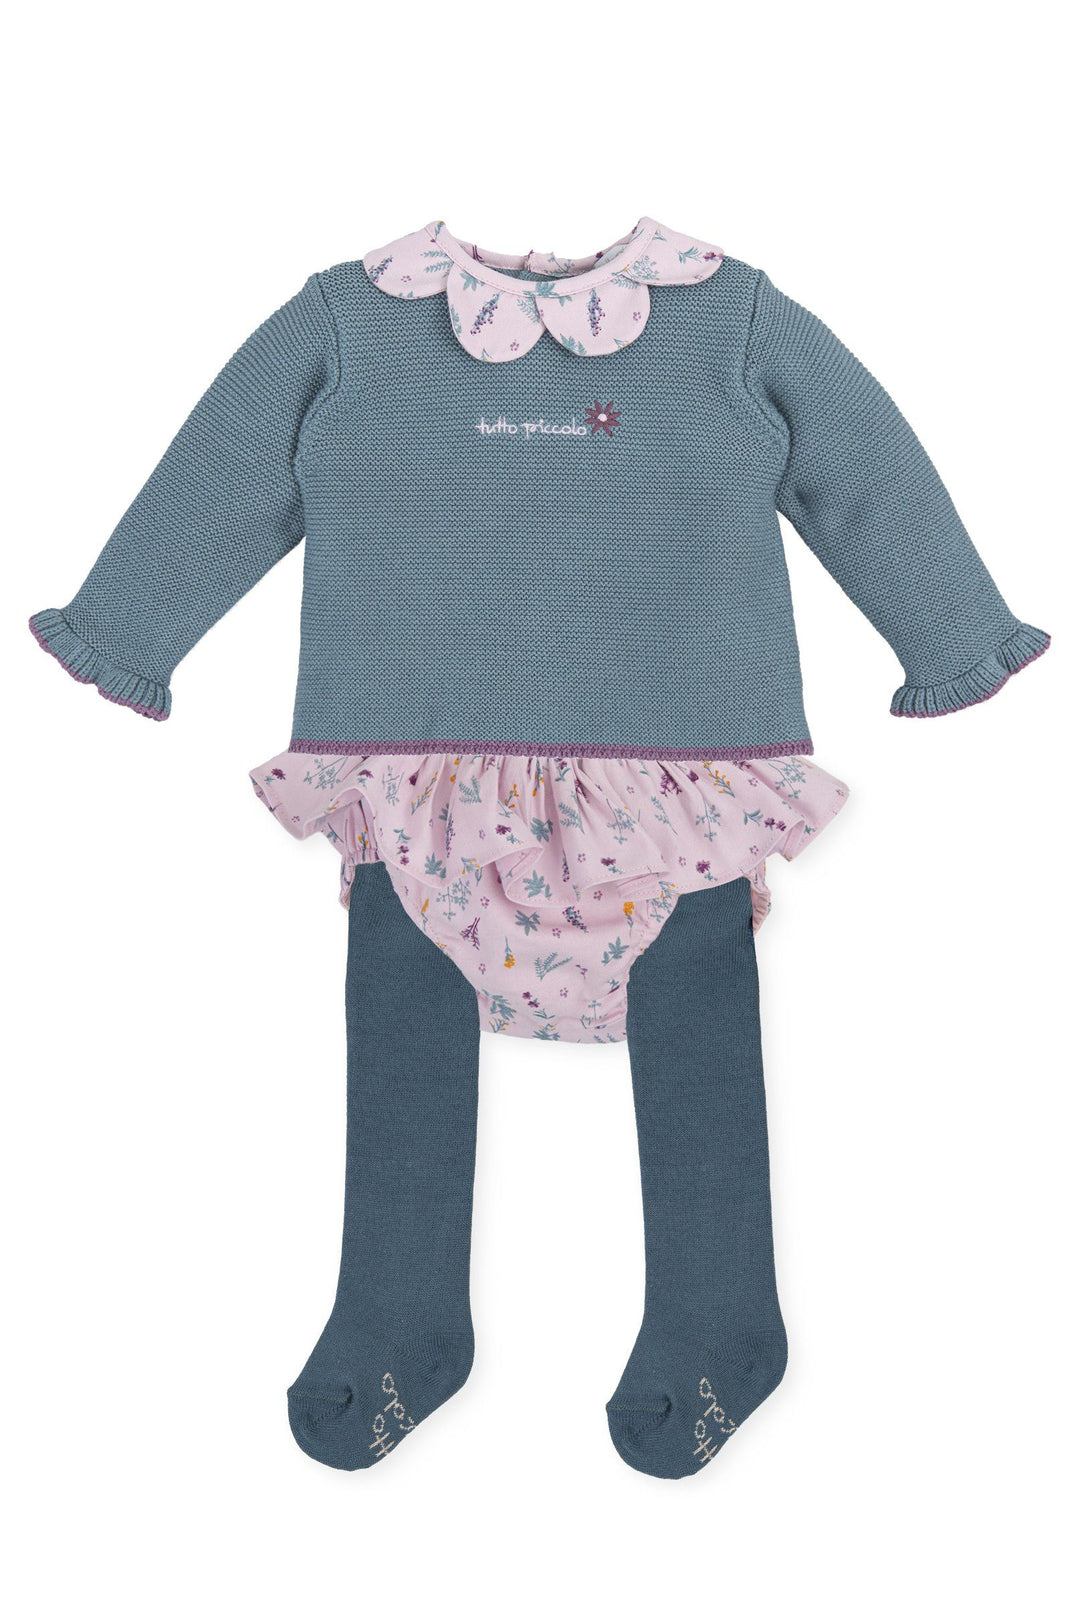 Tutto Piccolo "Naomi" Teal & Lilac Knit Top, Bloomers & Tights | Millie and John